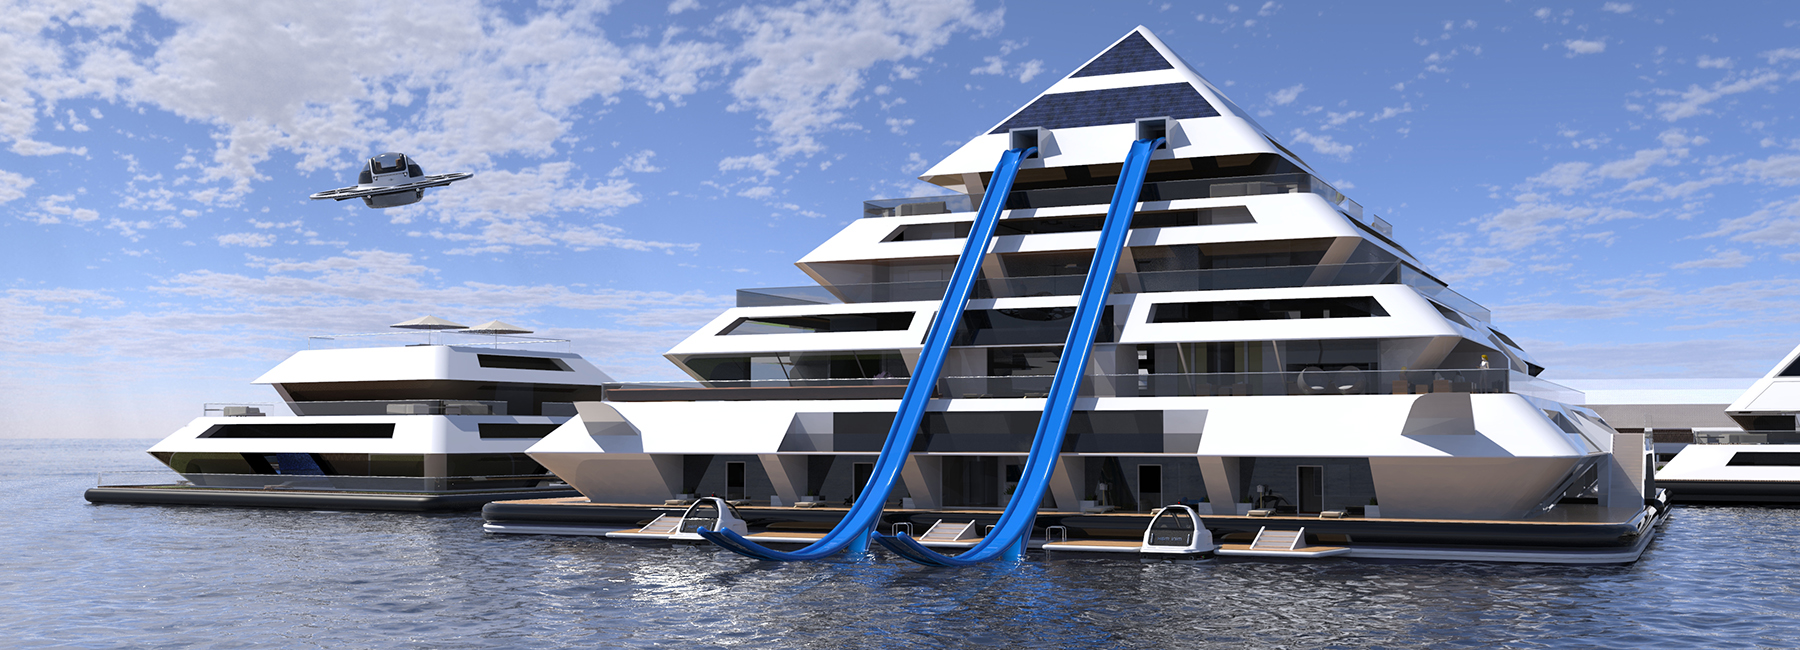 floating city of modular, eco-friendly pyramids is now enrolling citizens